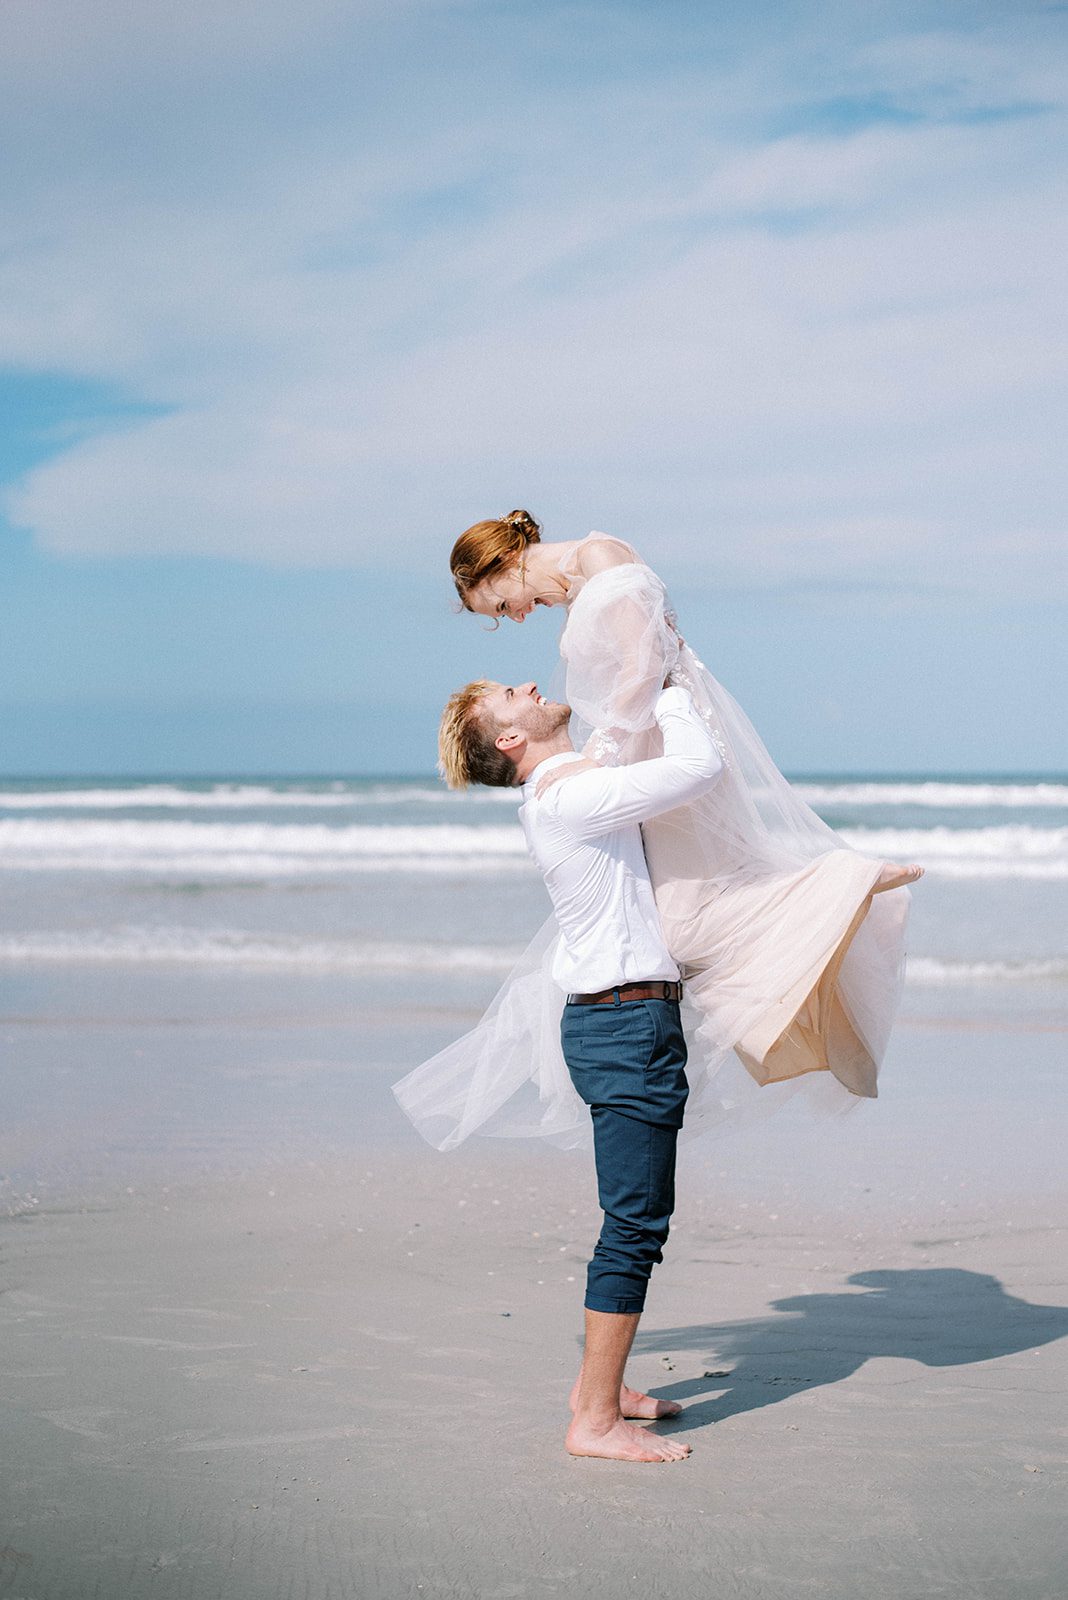 Minimalist Styled Wedding with bride and groom at New Smyrna Beach in Florida on their wedding day with groom picking up bride and spinning her around as she smiles and laughs